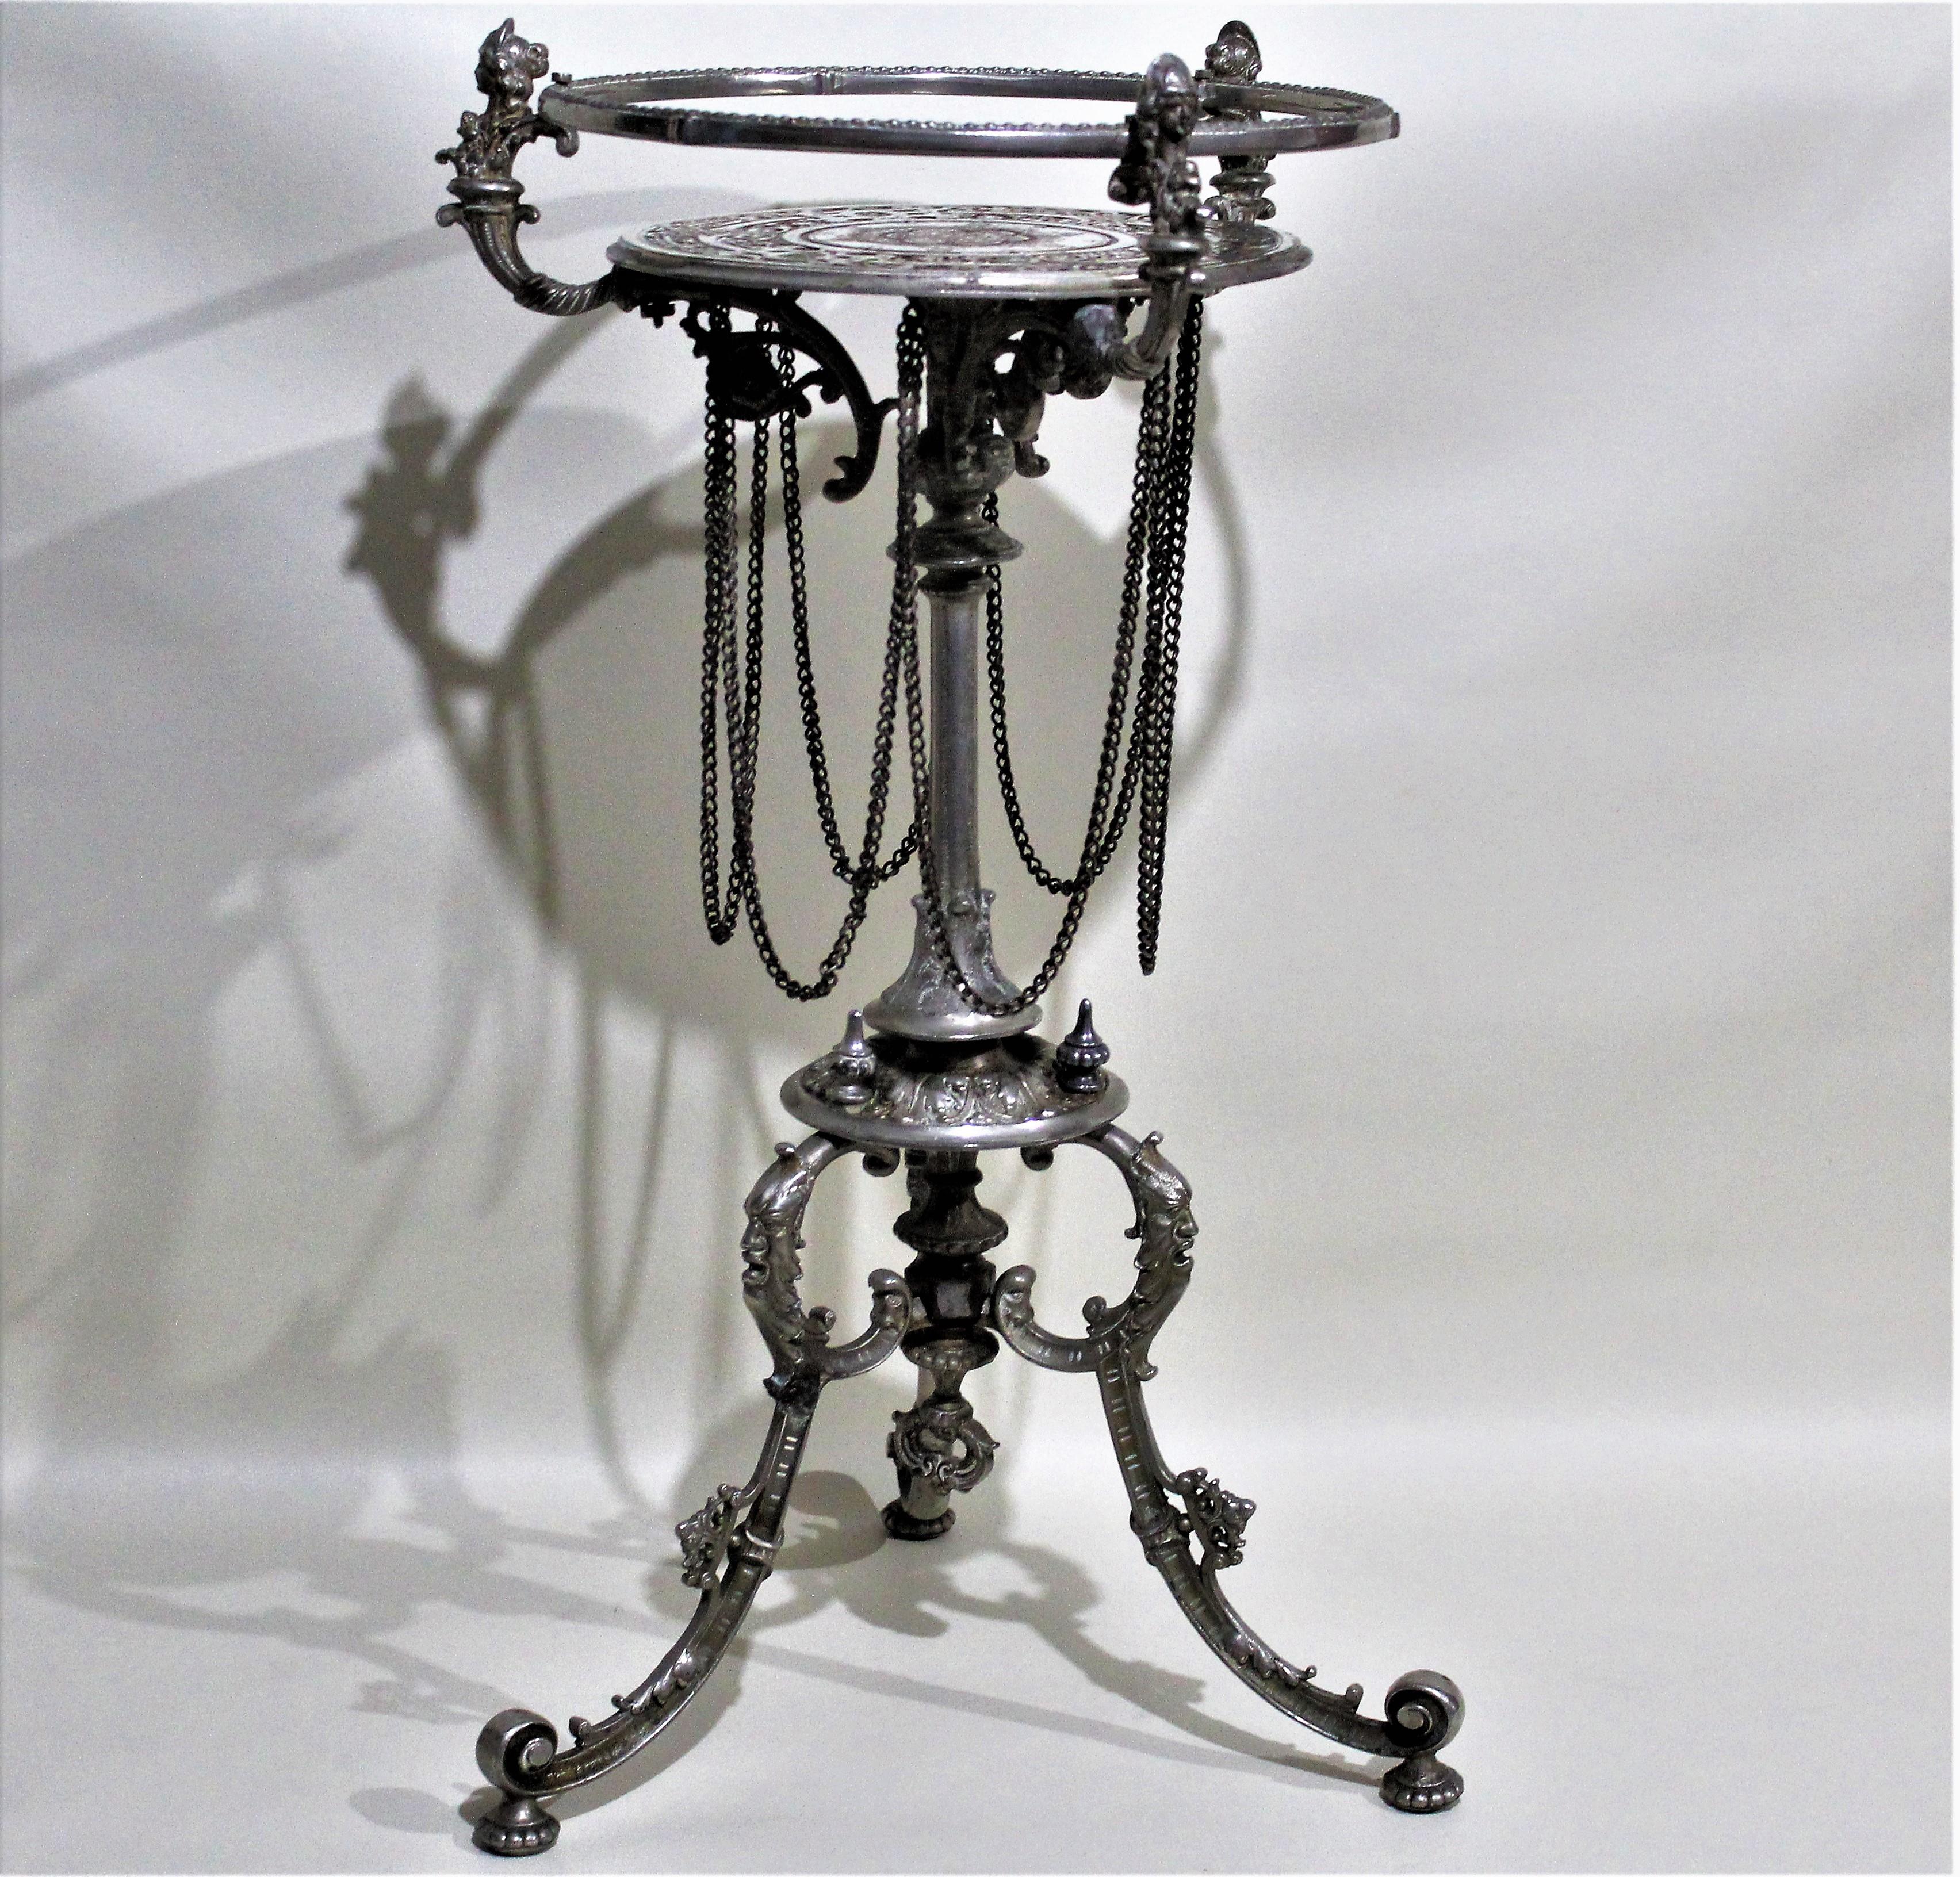 Gothic Revival Antique Victorian Cast Metal Plated Pedestal Table Figural Accents Engraved Top